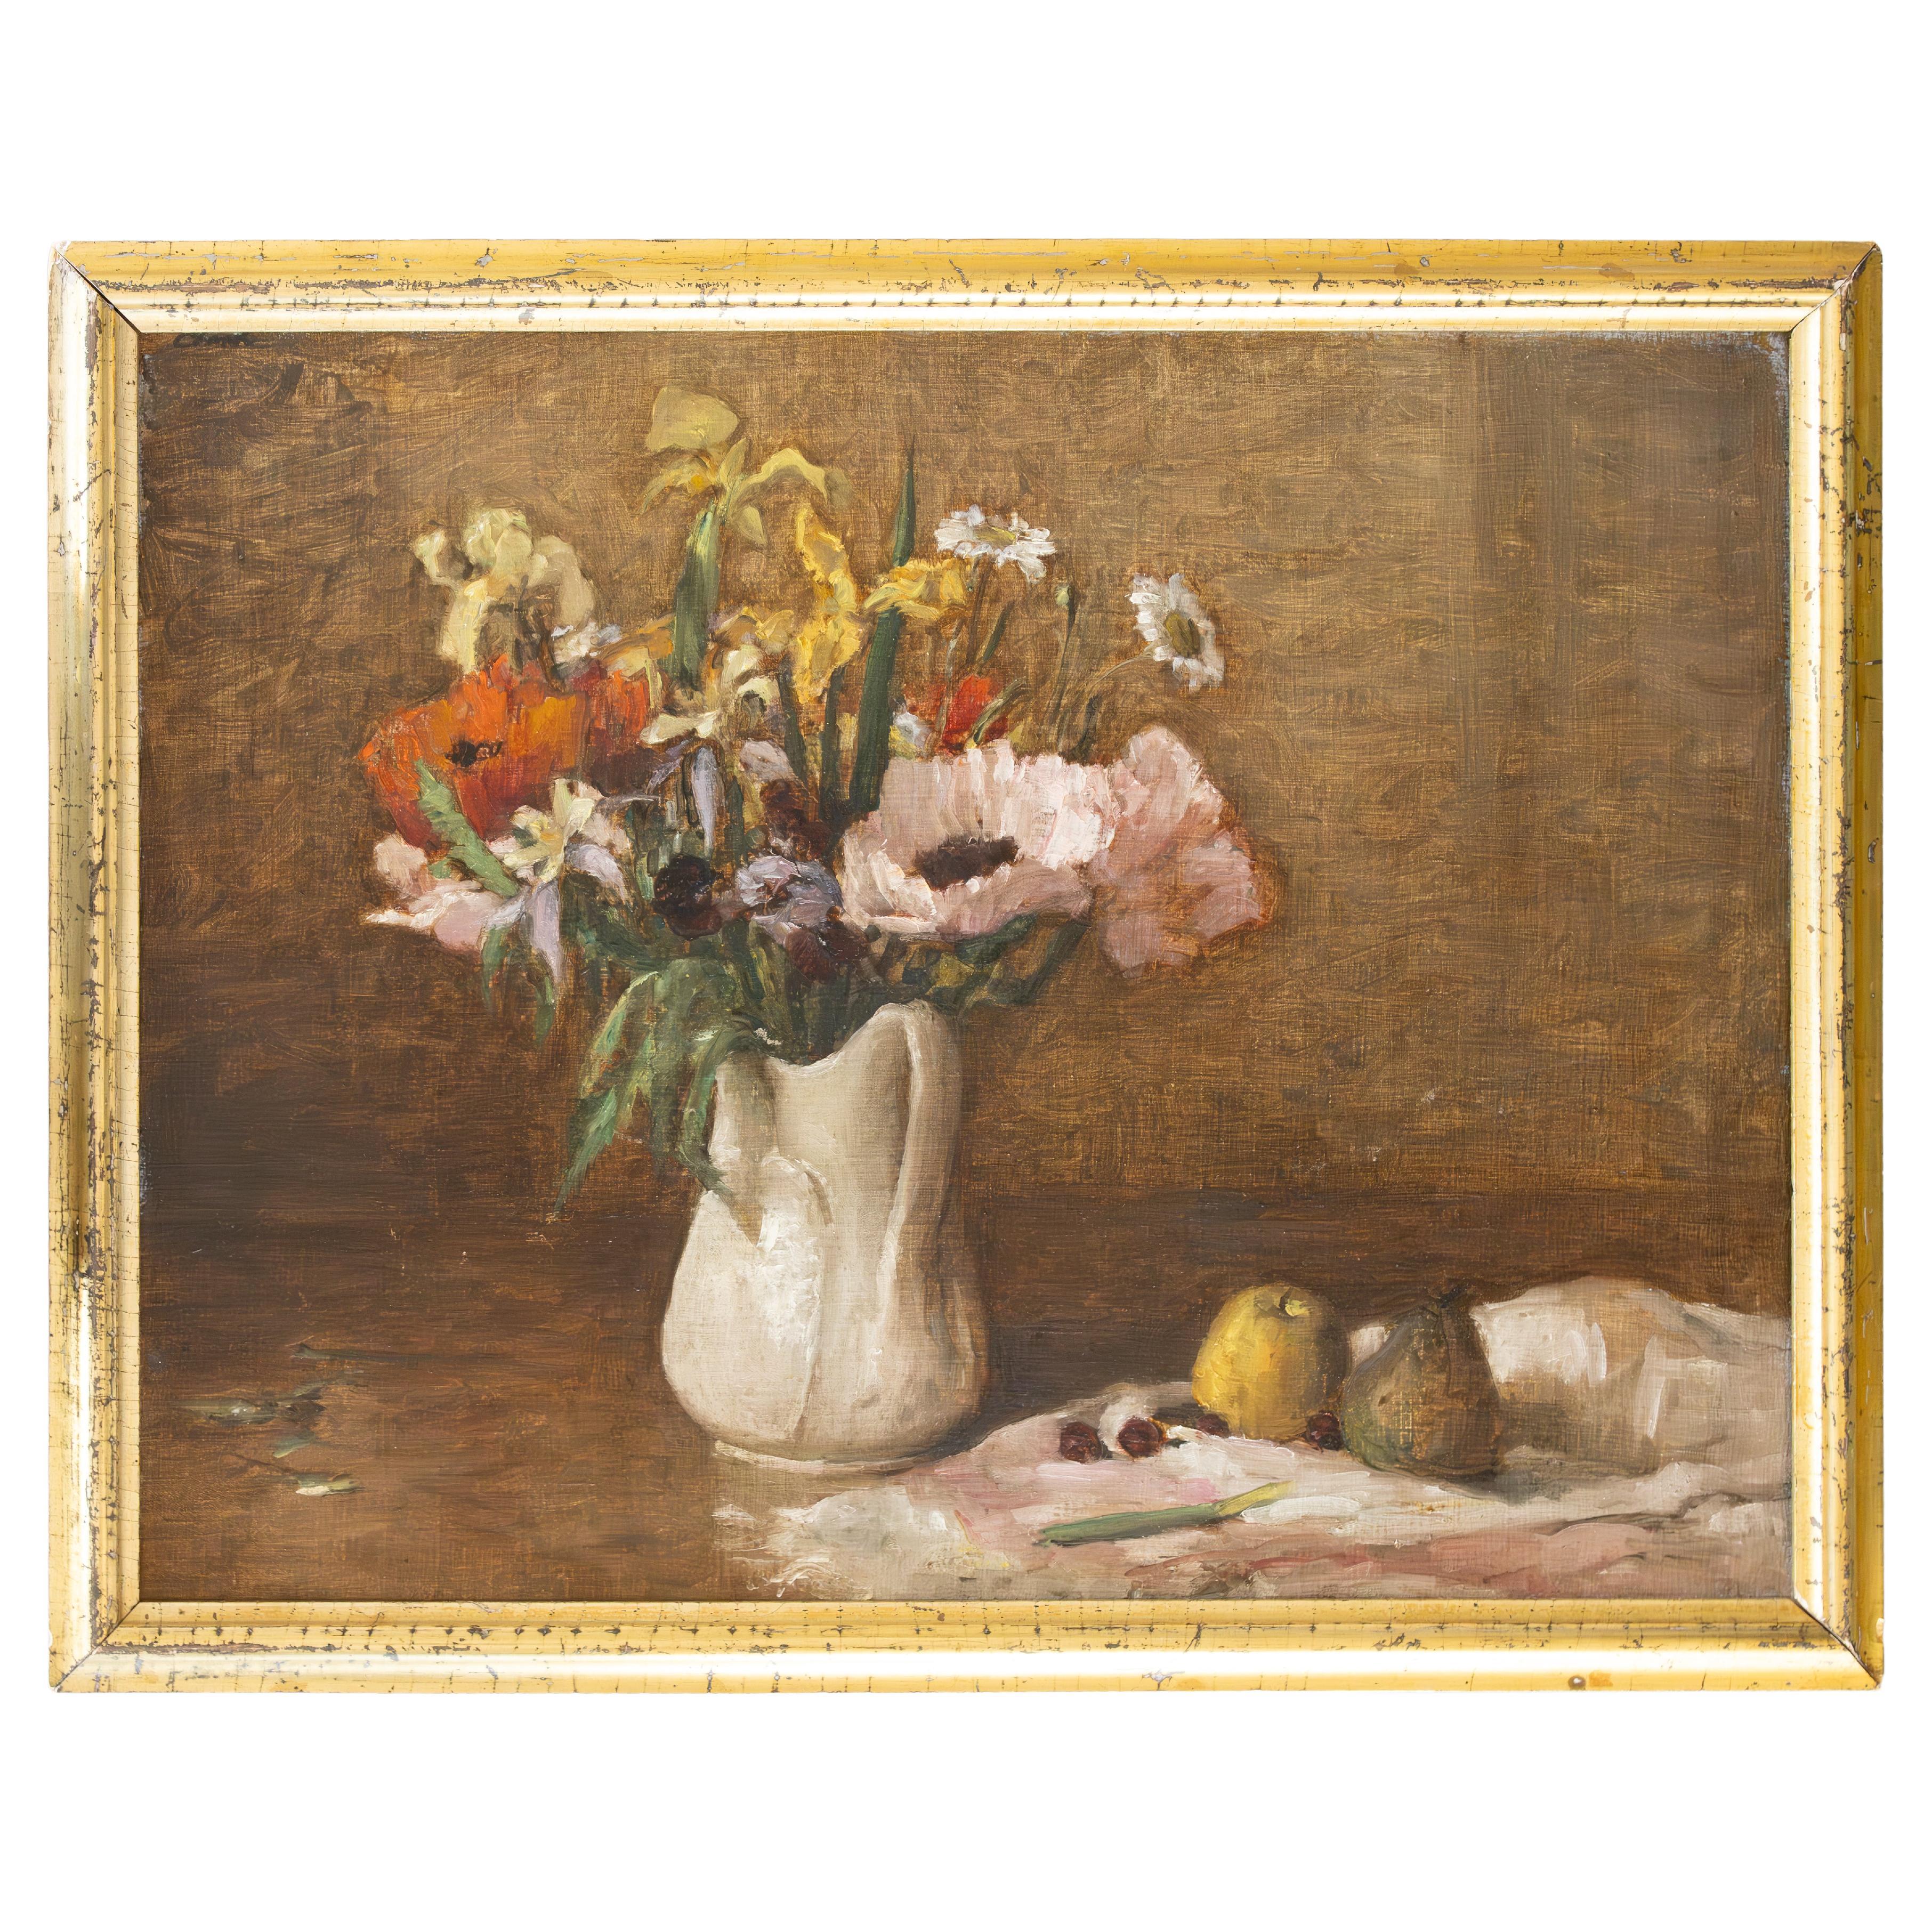 Ironstone Vase with Poppies, Pears - Still Life, Oil on Canvas